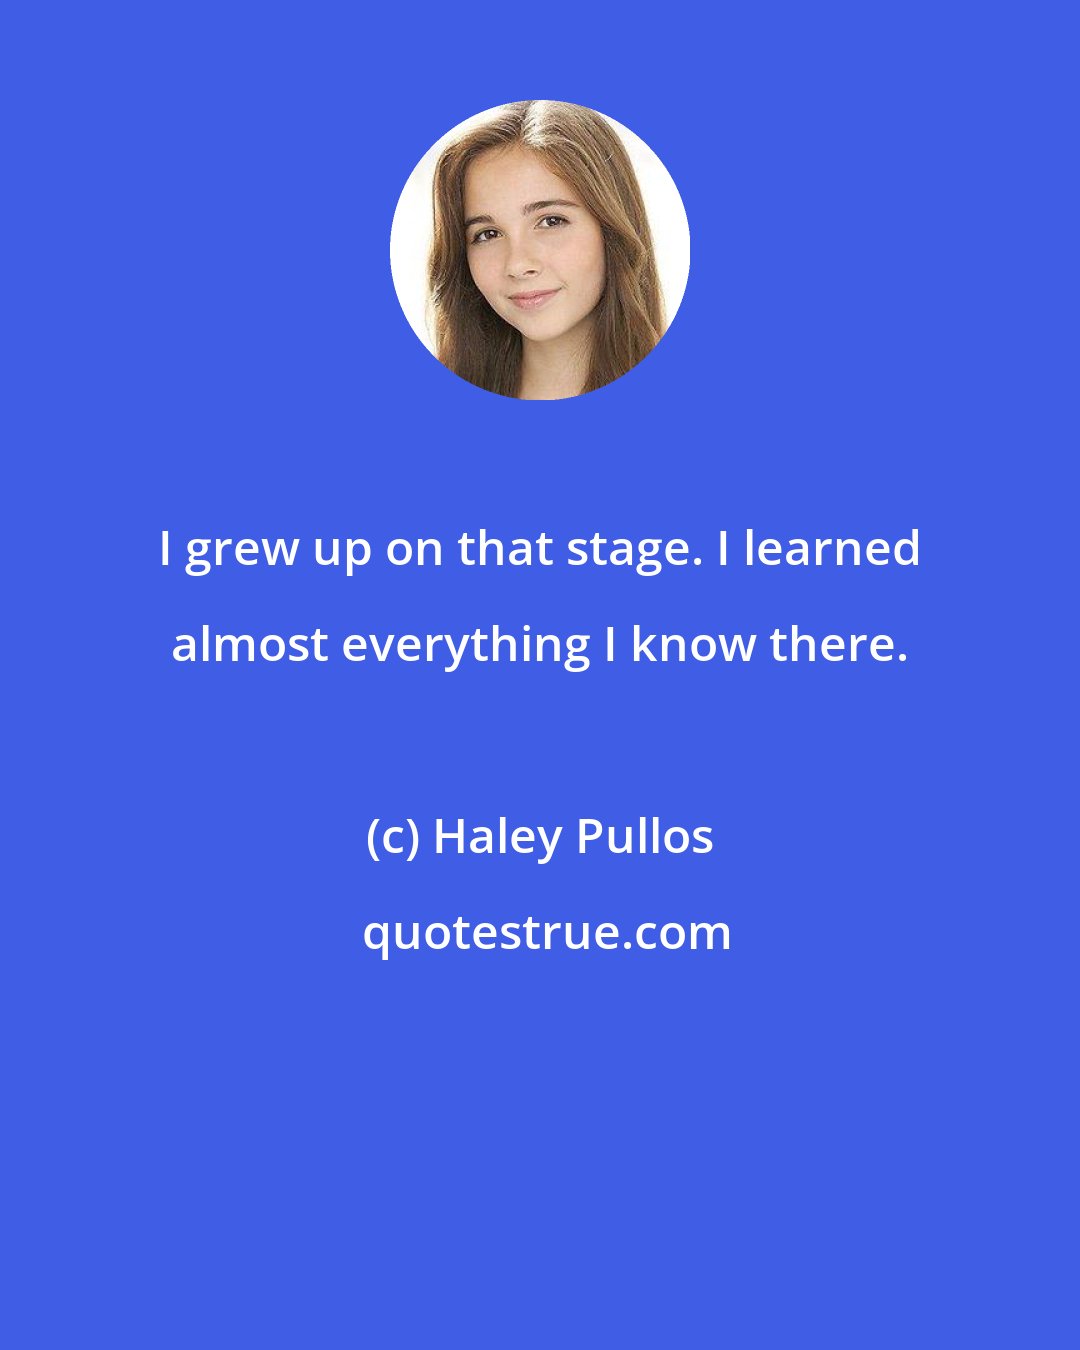 Haley Pullos: I grew up on that stage. I learned almost everything I know there.